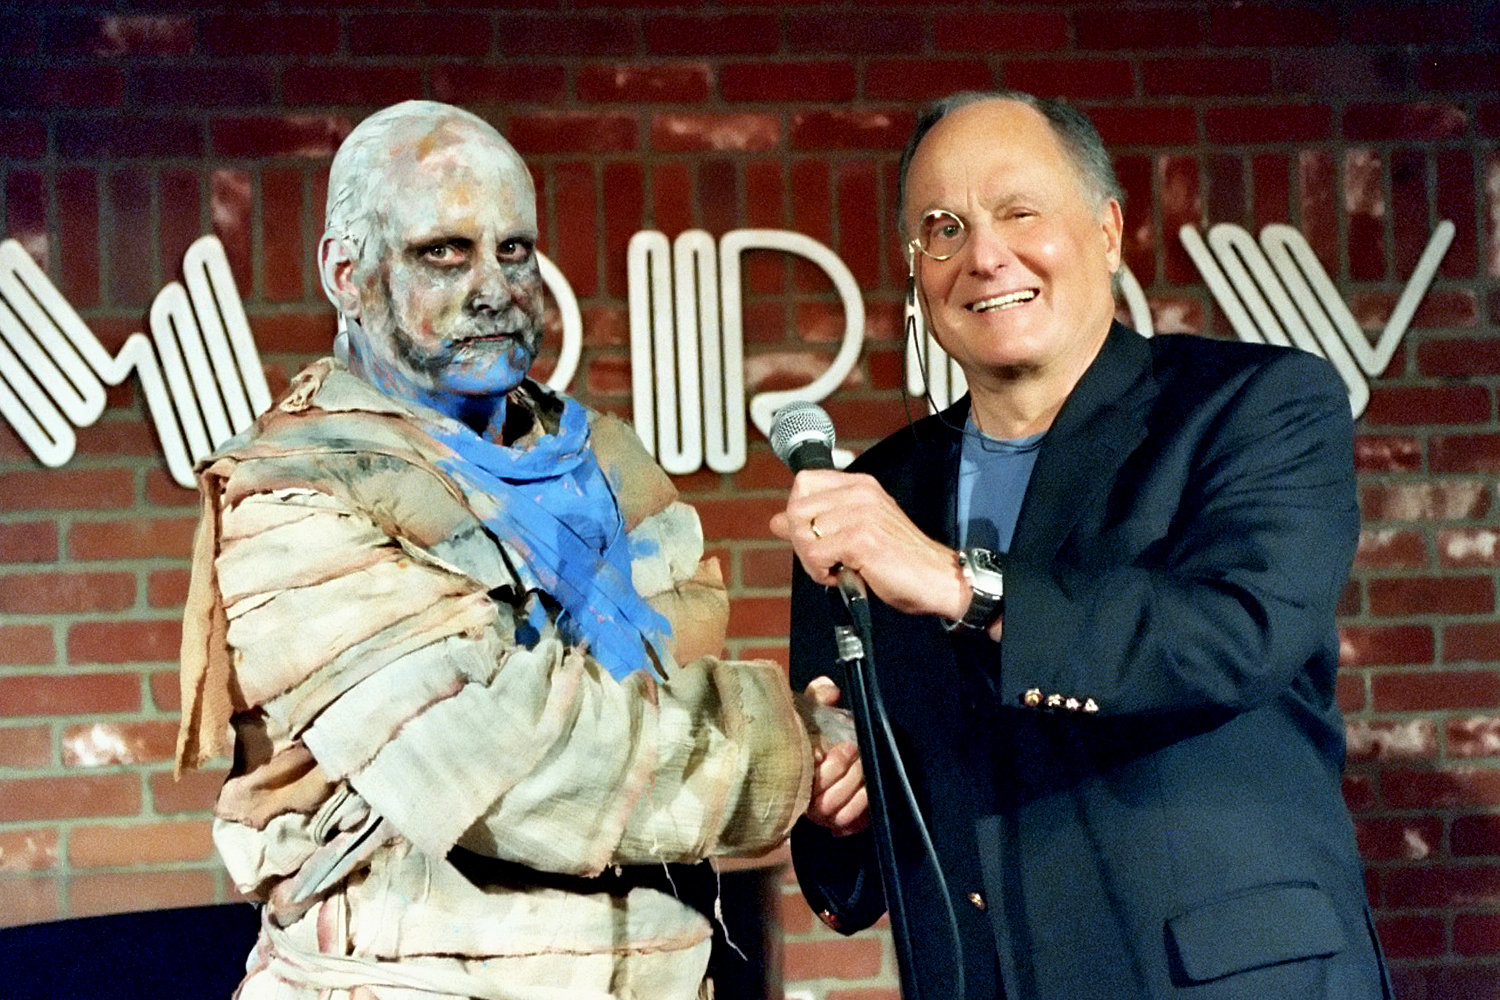 Tom Rees (Mummy) with Budd Friedman at the Improv in 